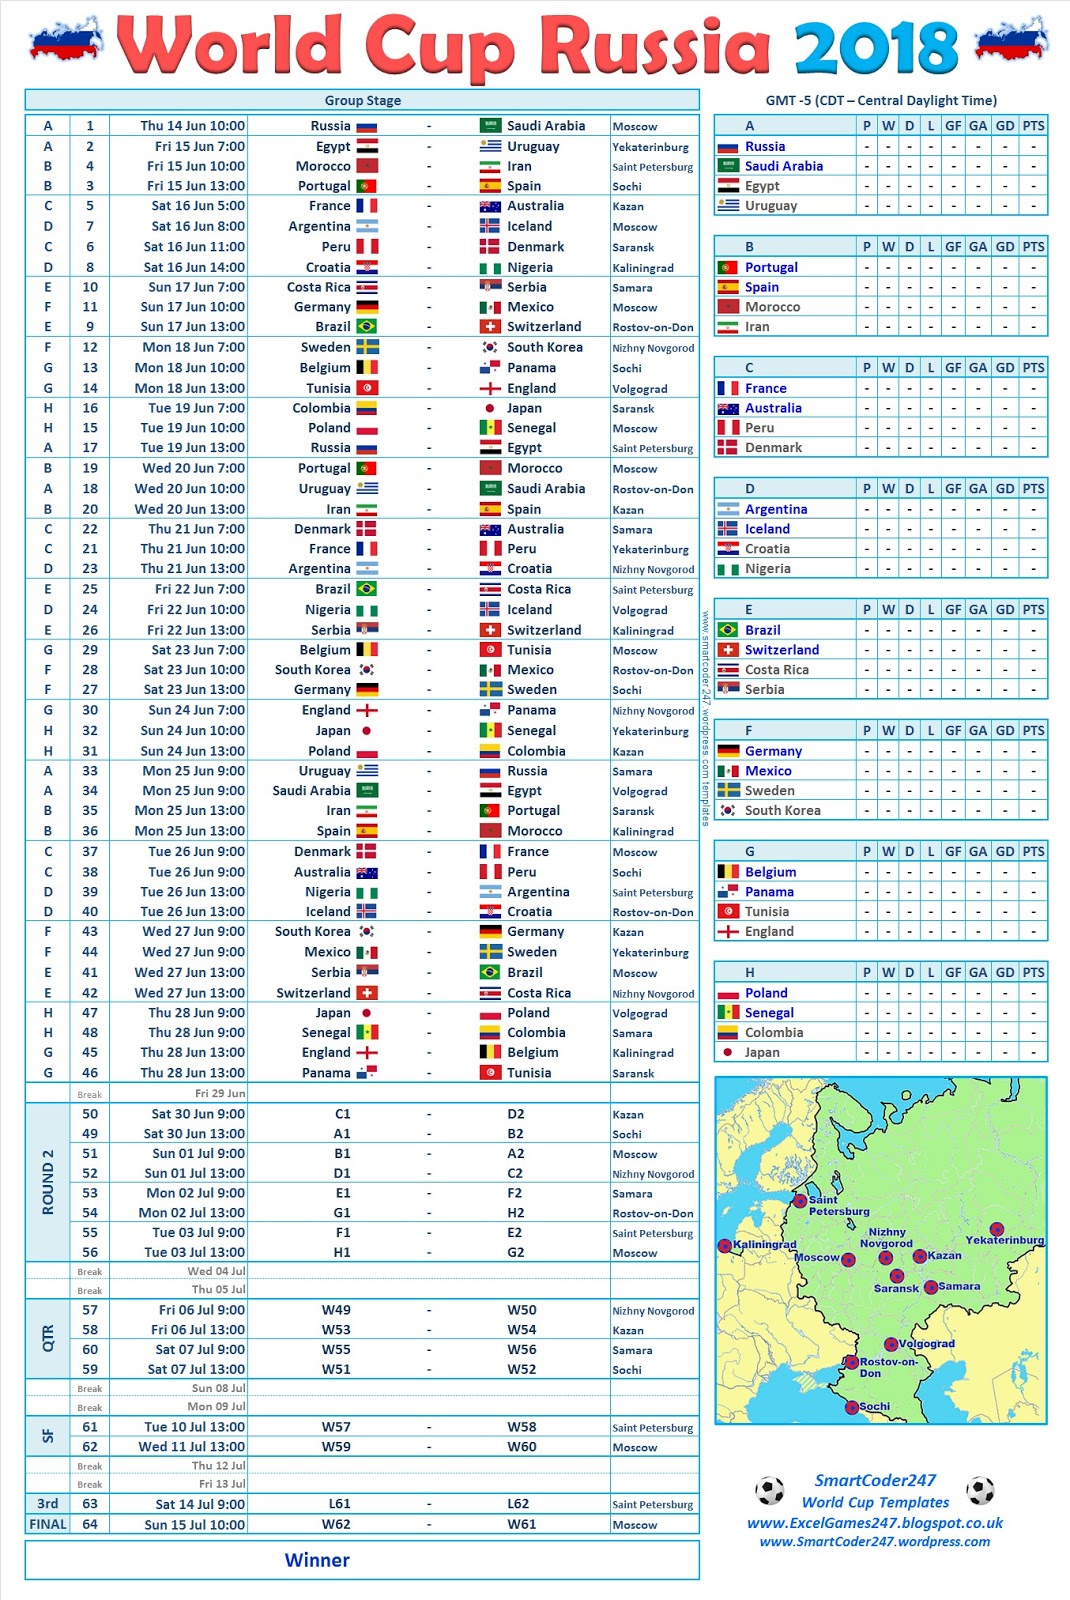 Smartcoder 247 - Euro 2020 Football Wall Charts and Excel Templates: Option E : Russia 2018 ...